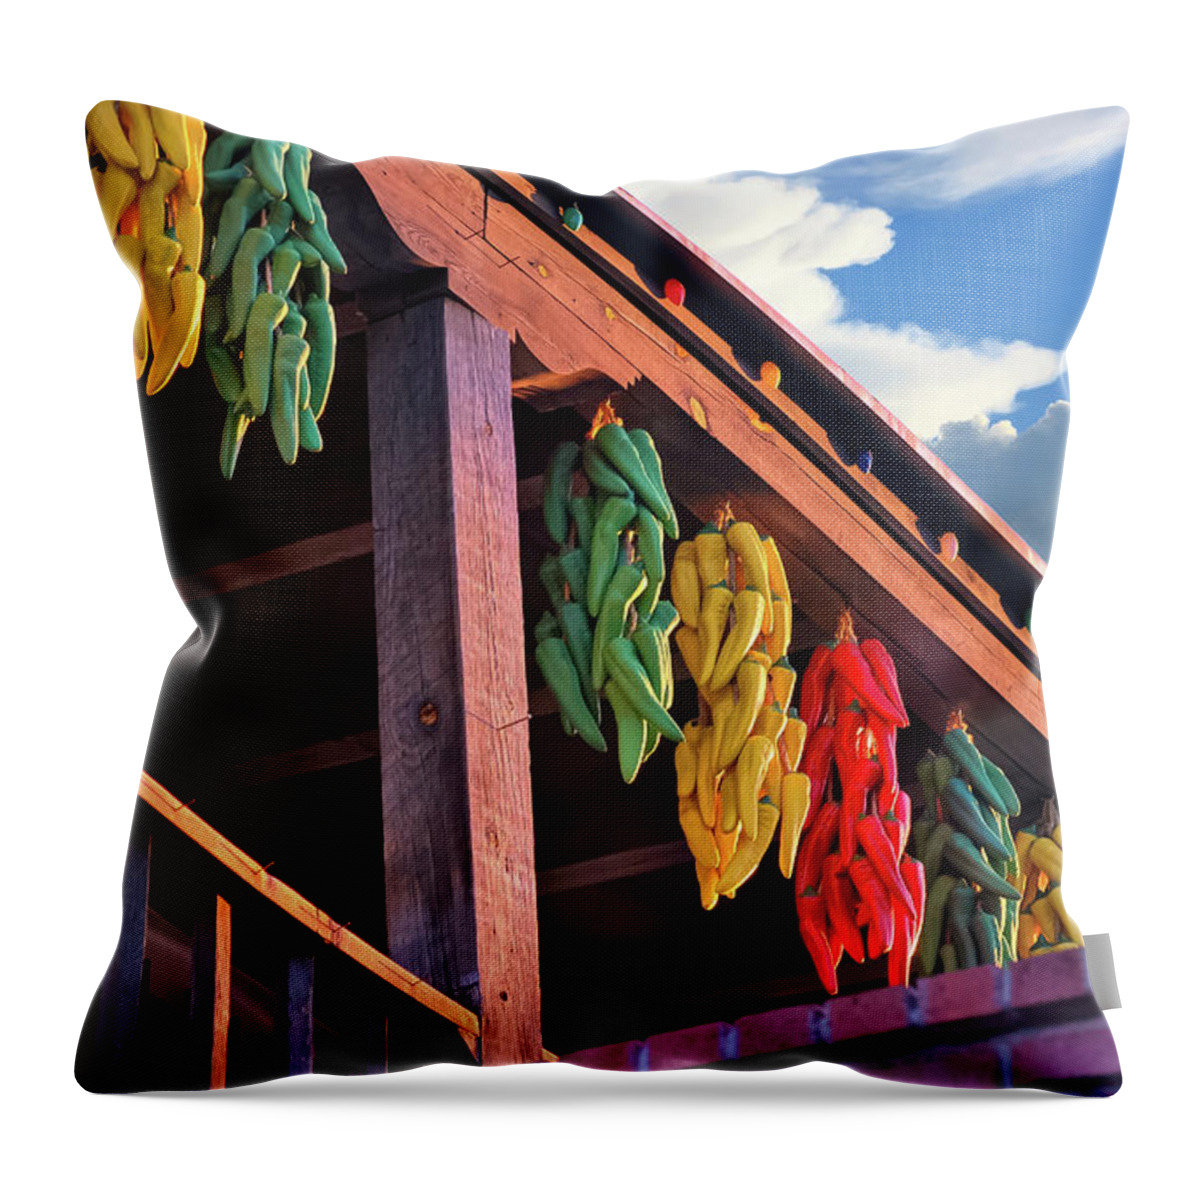 America Throw Pillow featuring the photograph Hanging Peppers in Old Town Albuquerque New Mexico by Gregory Ballos